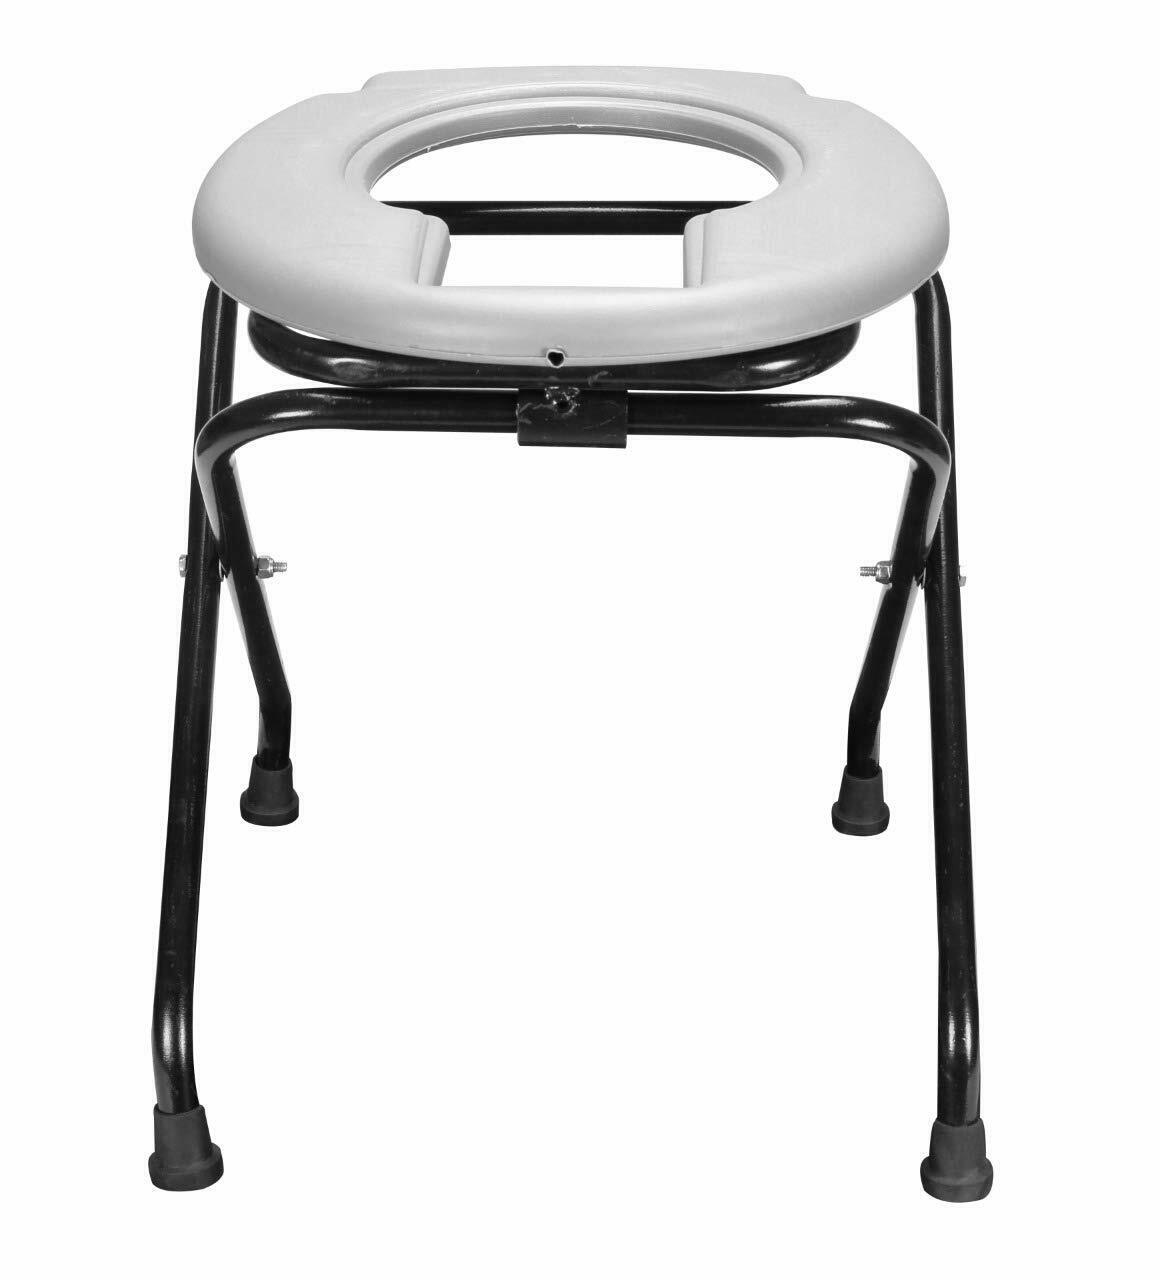 6 Units Of Folding Stainless Steel Mobile Commode Chair With Anti-skid Seat